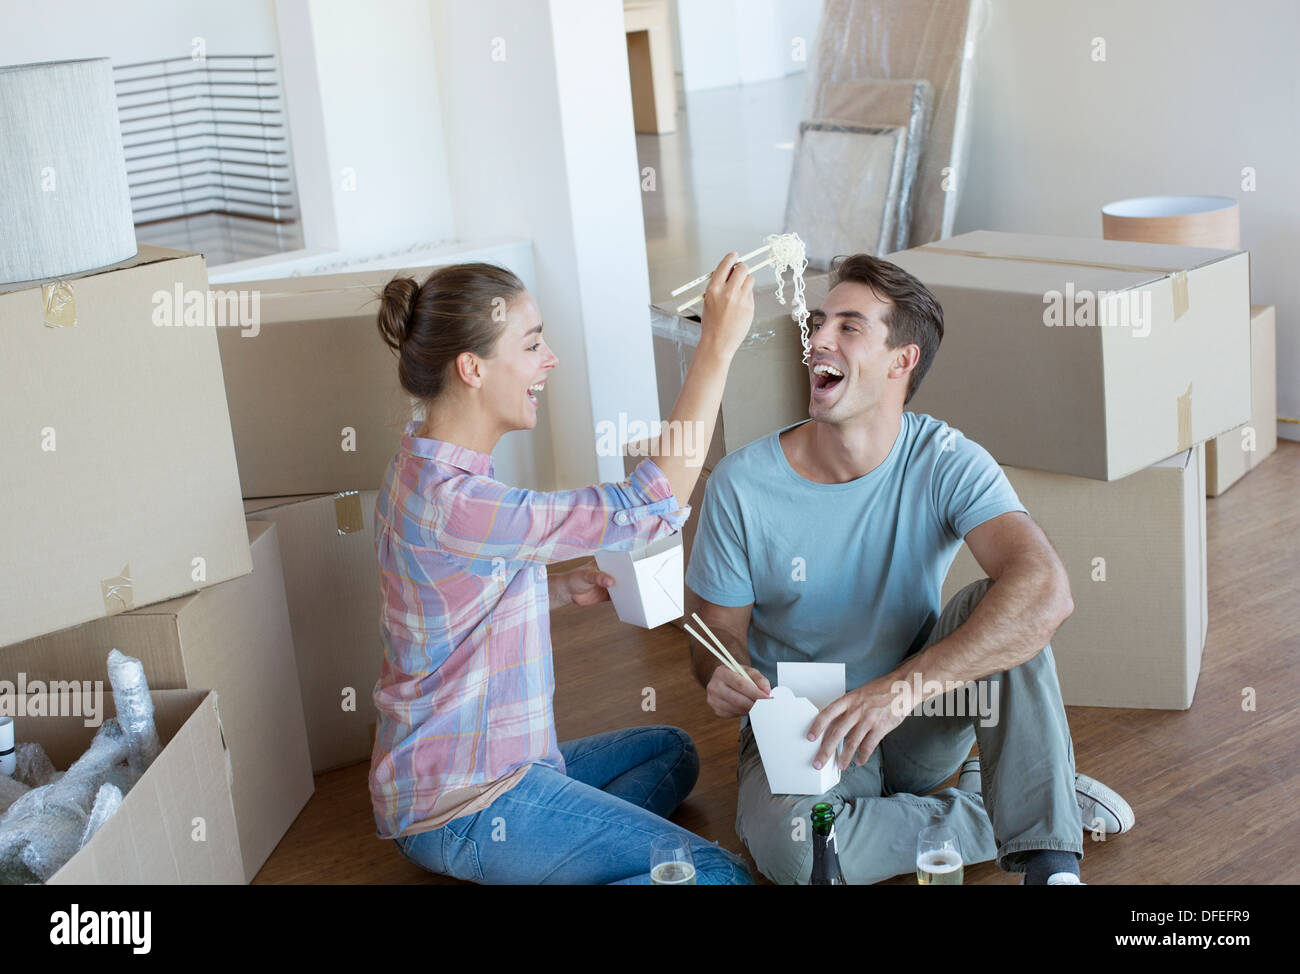 Couple eating Chinese take out food in new house Stock Photo